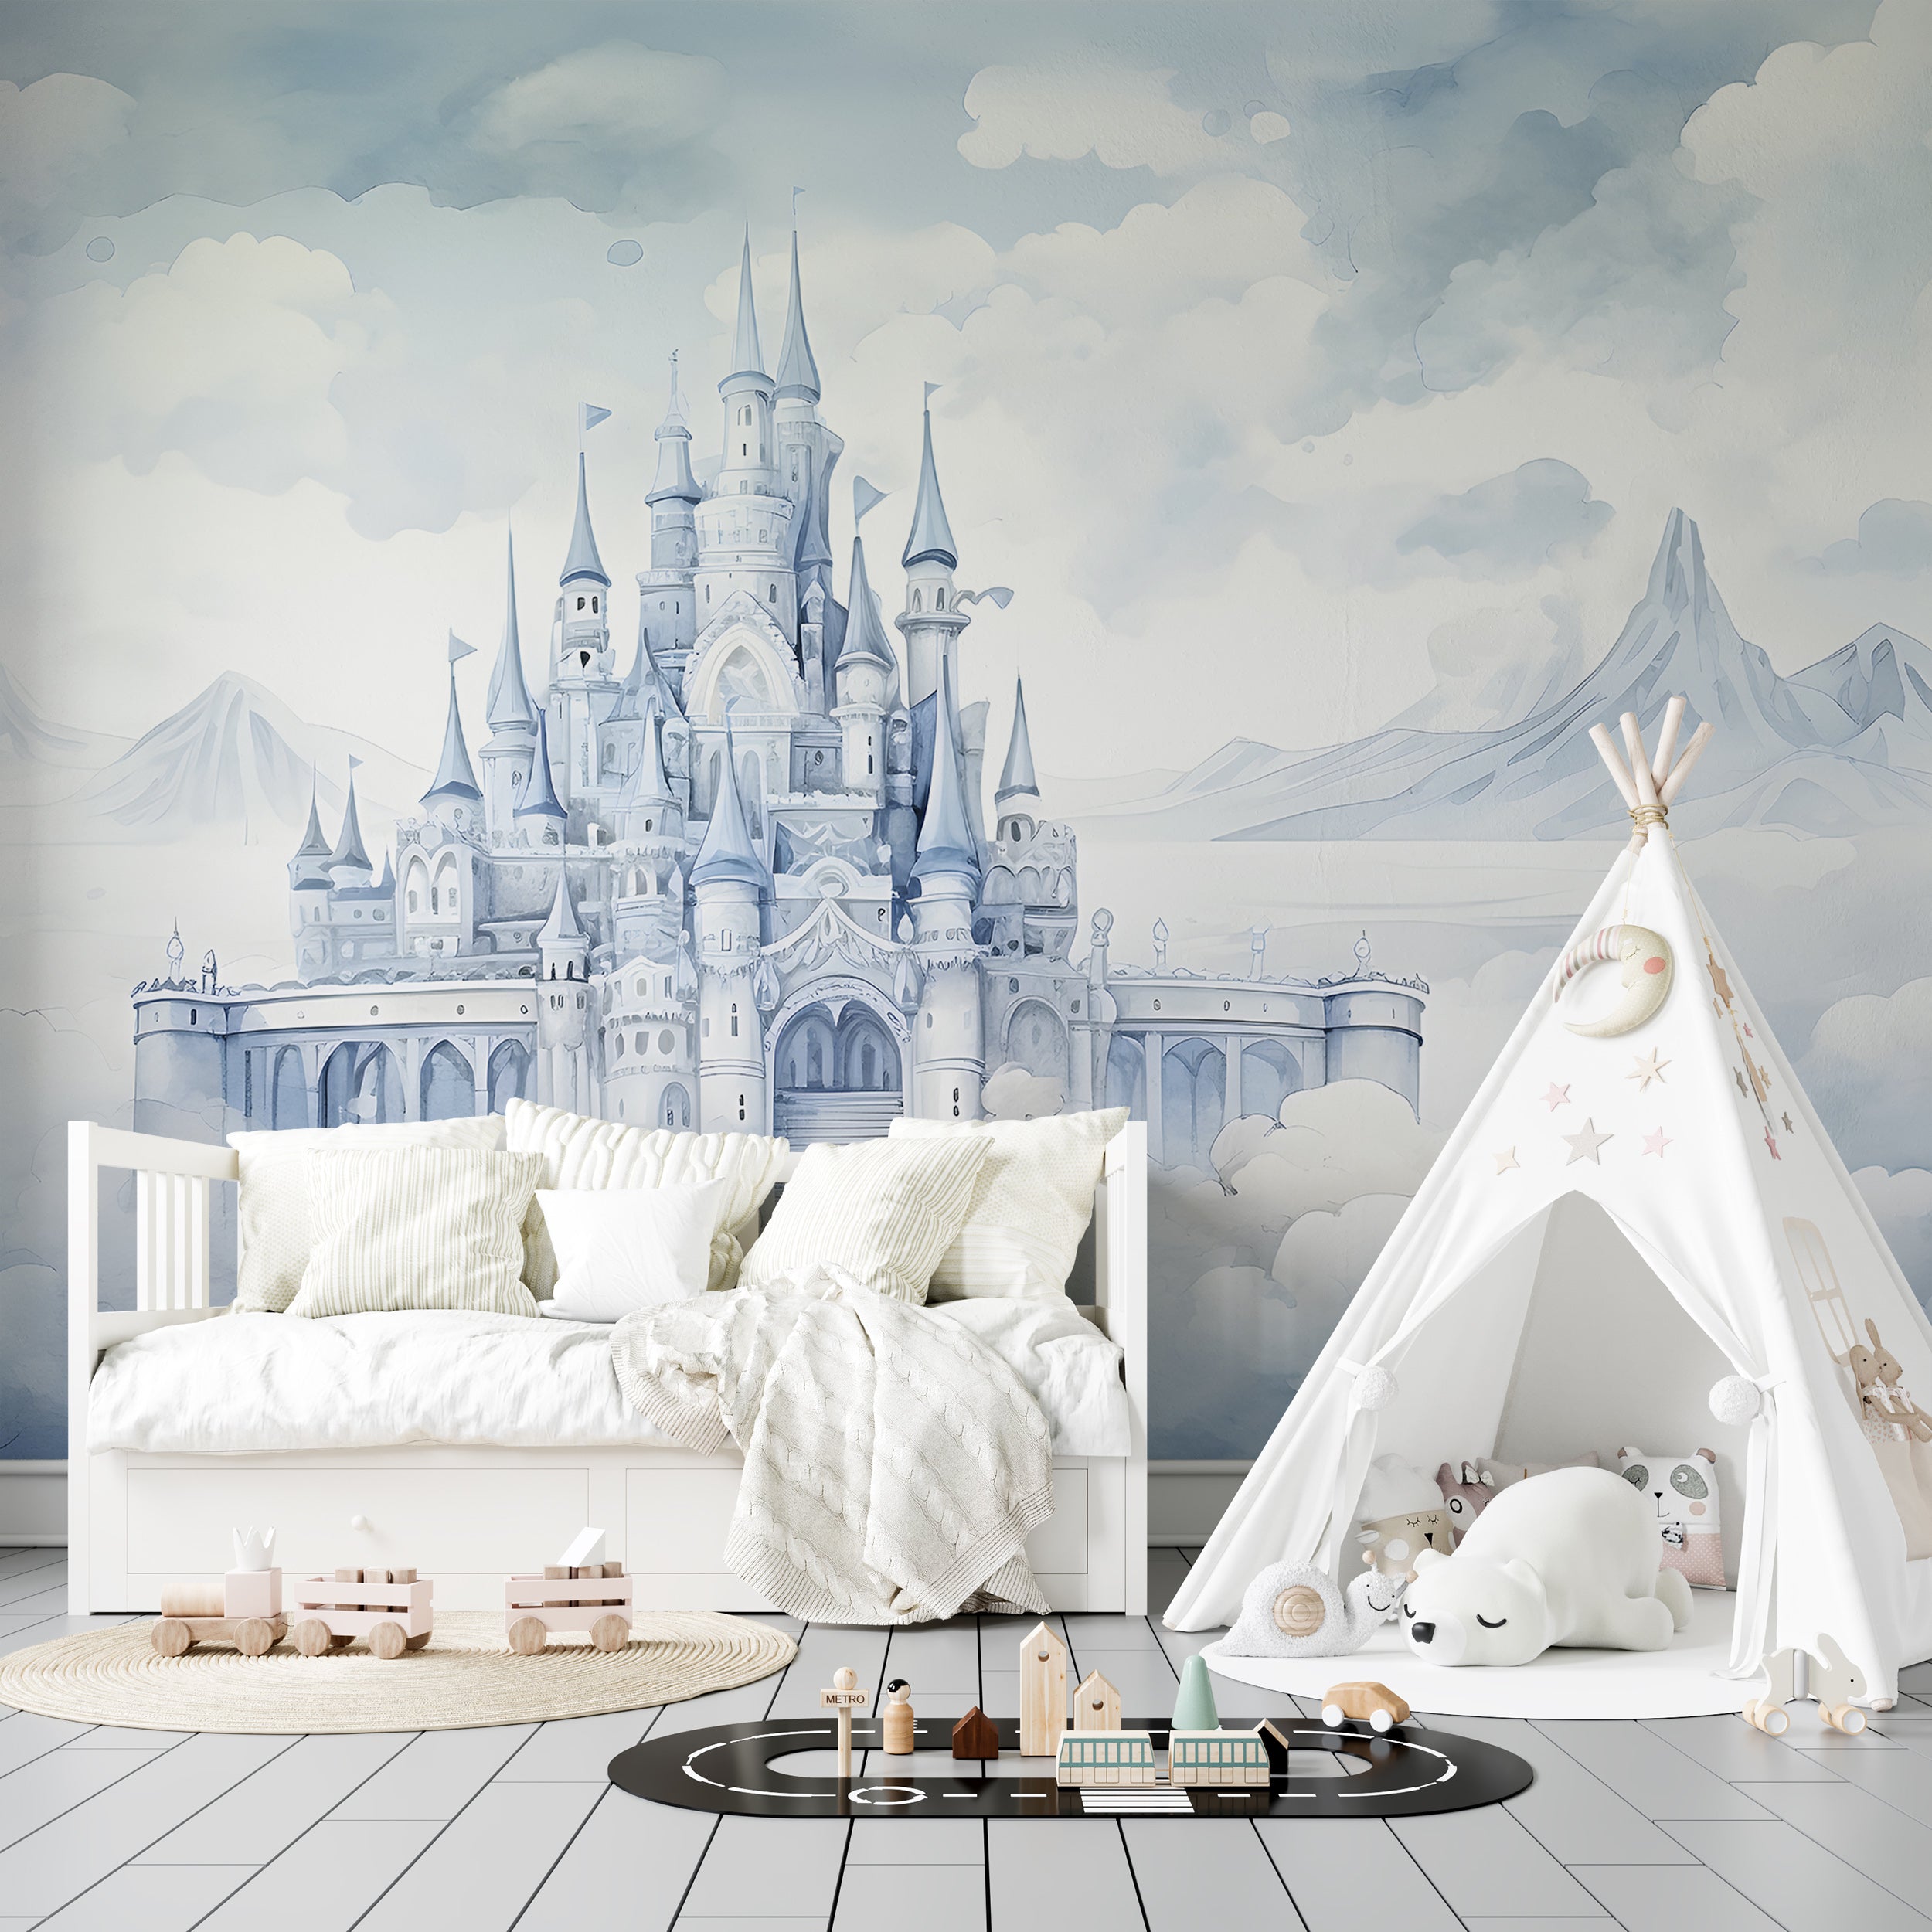 Fairytale Castle Peel and Stick Wall Mural